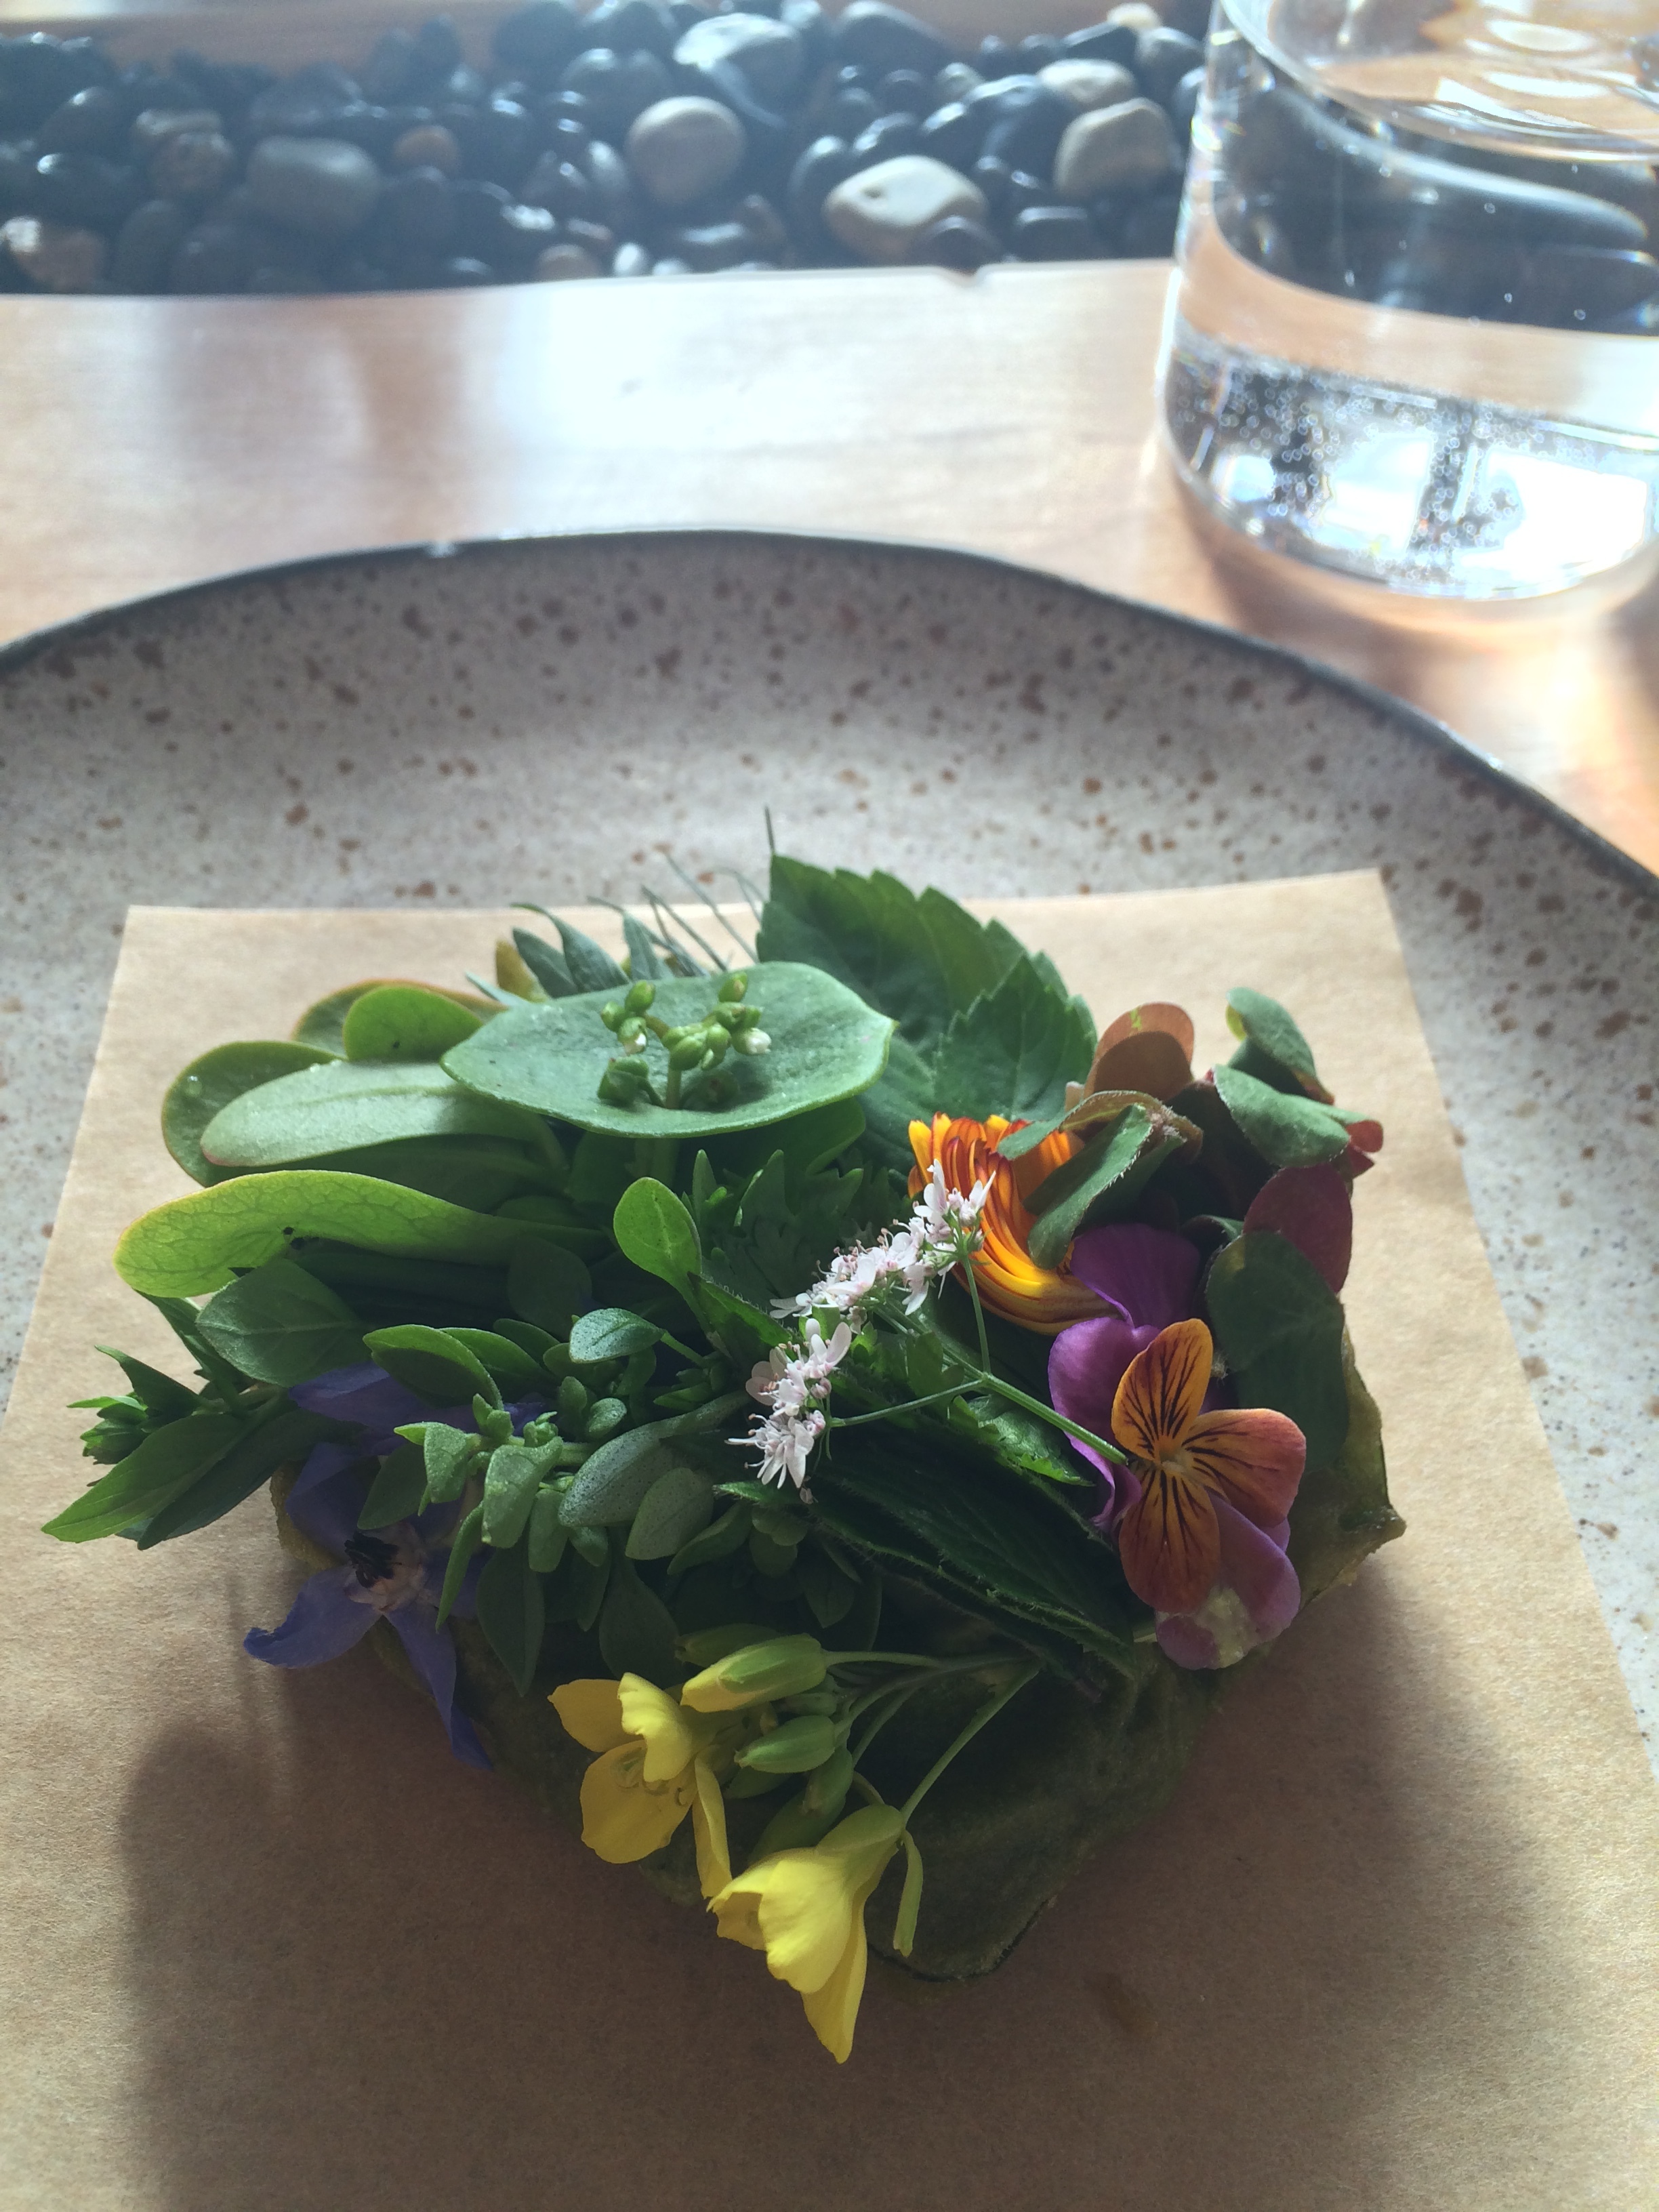 Wild herbs and crispy chicory leaves